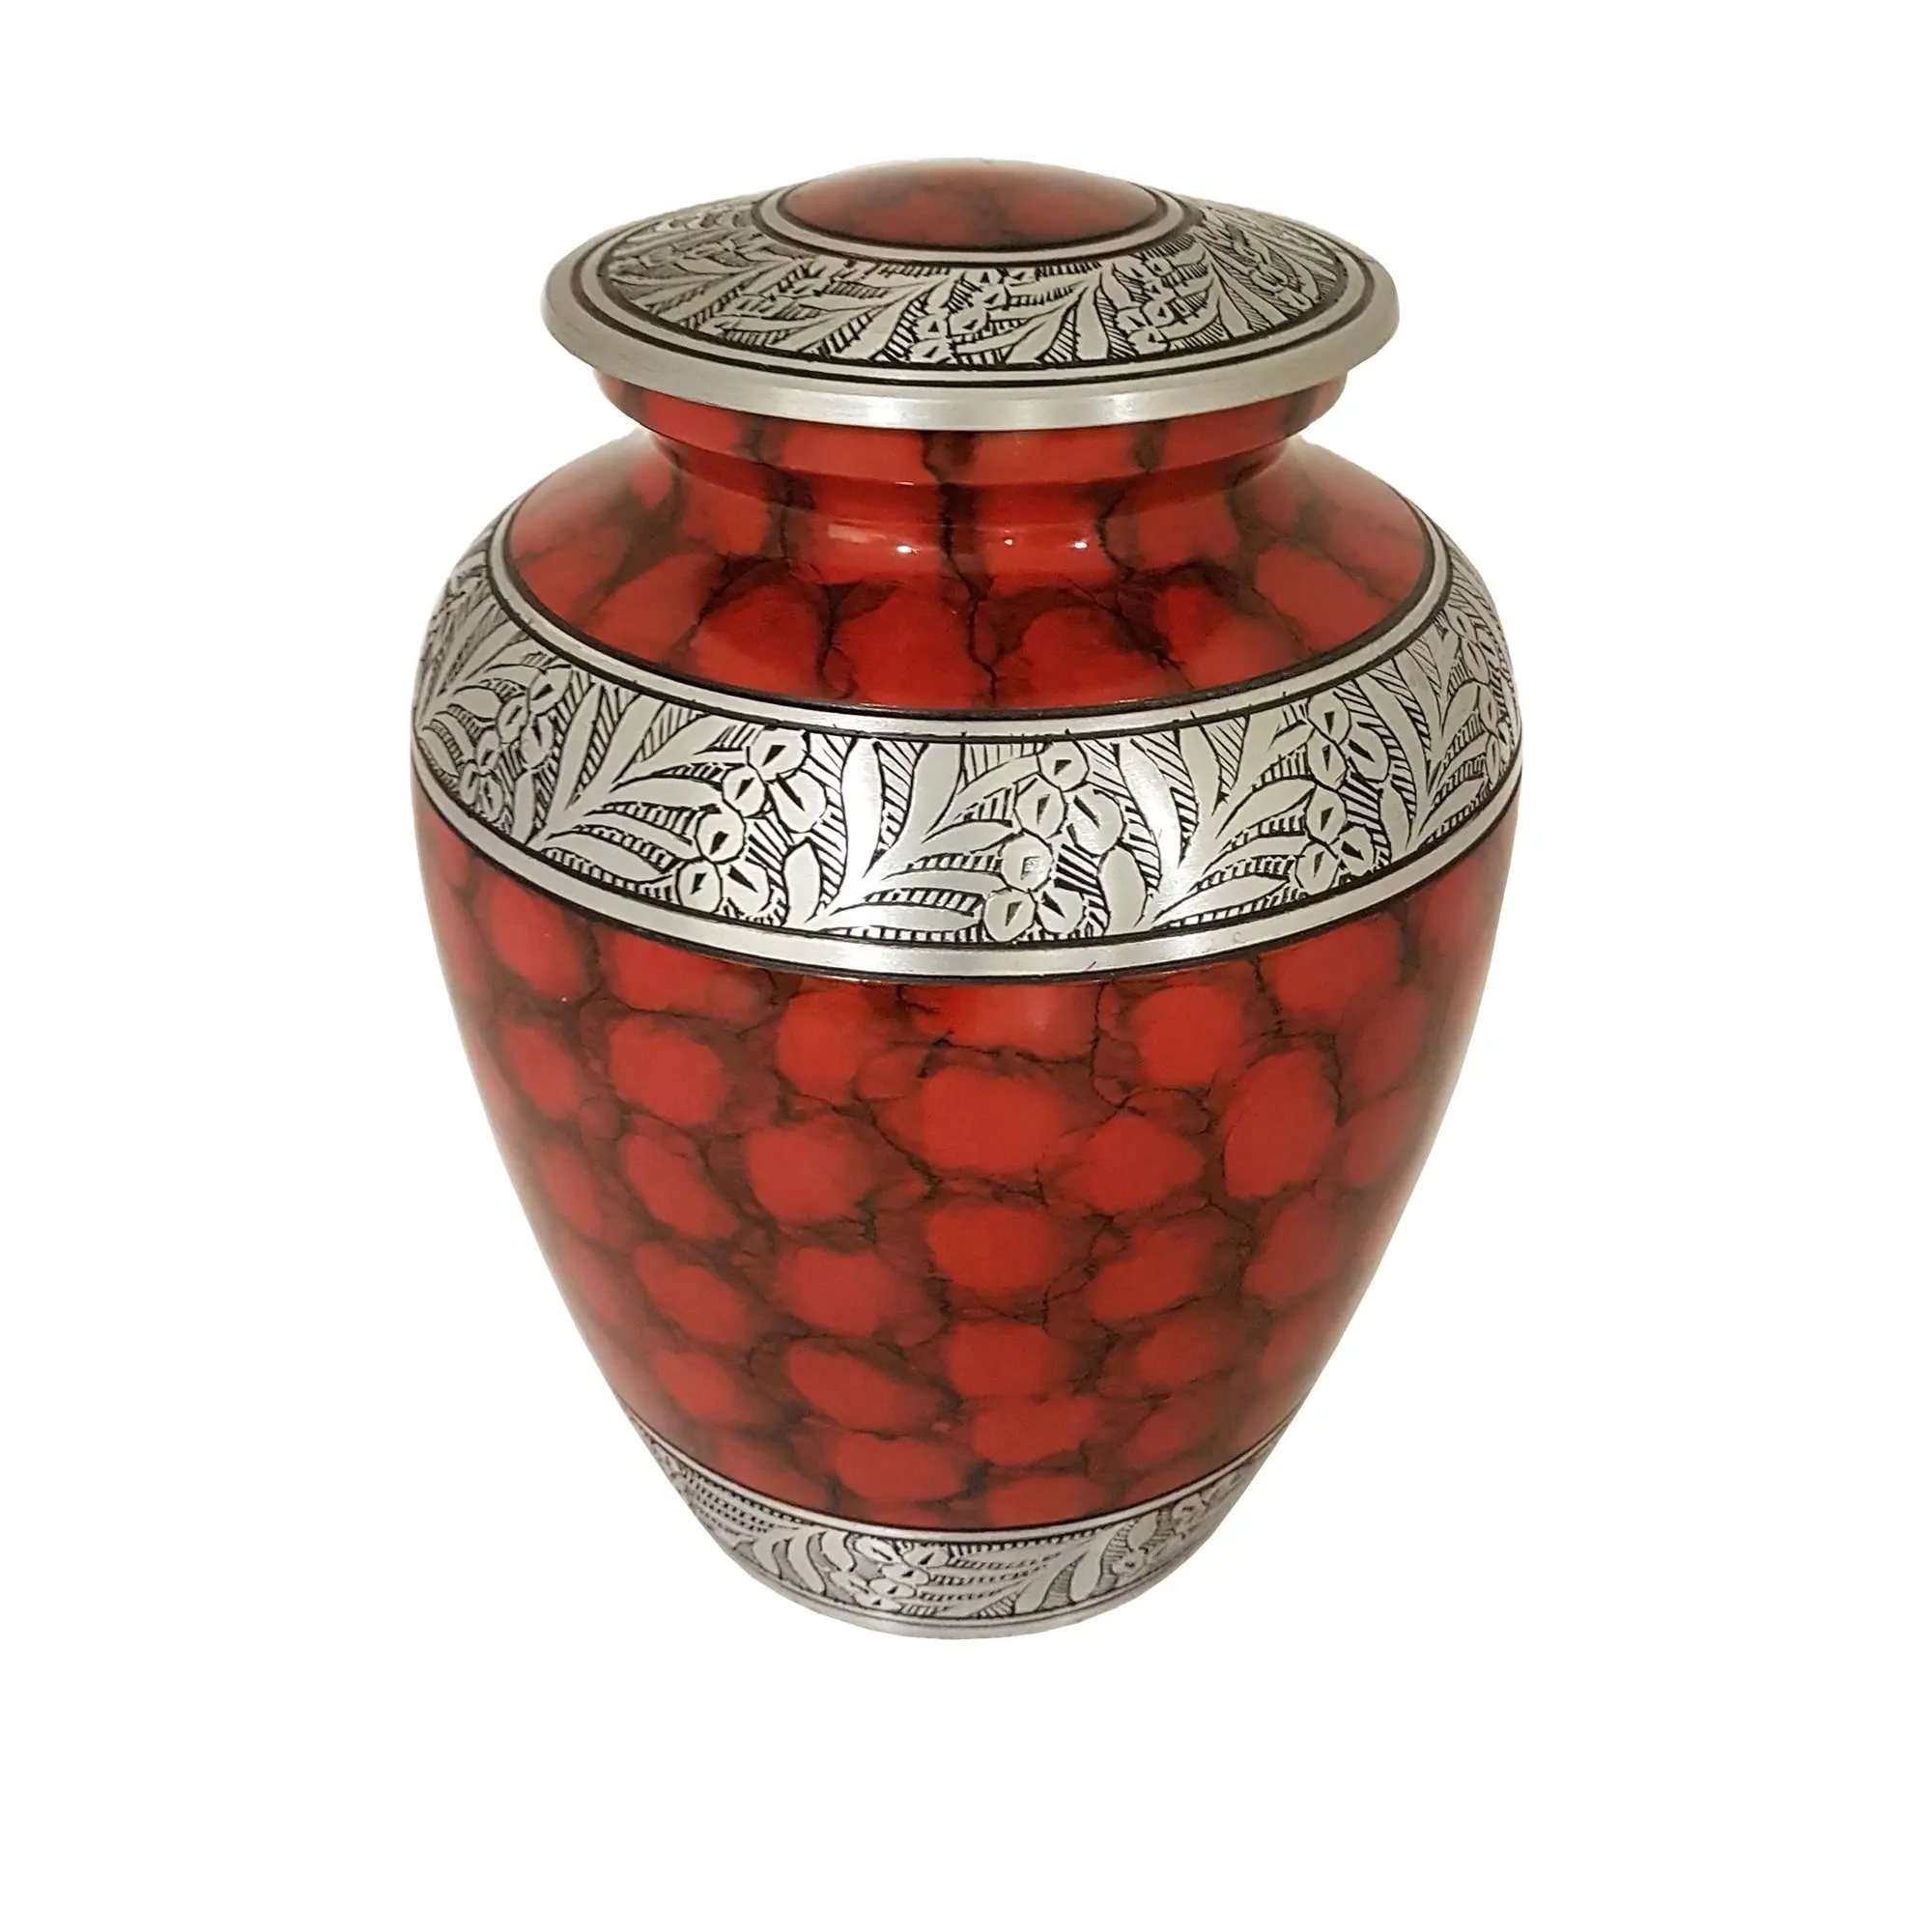 Vintage Design Cremation Urn for Human Ashes Fine Quality Red Fire Work Design with floral Engraved